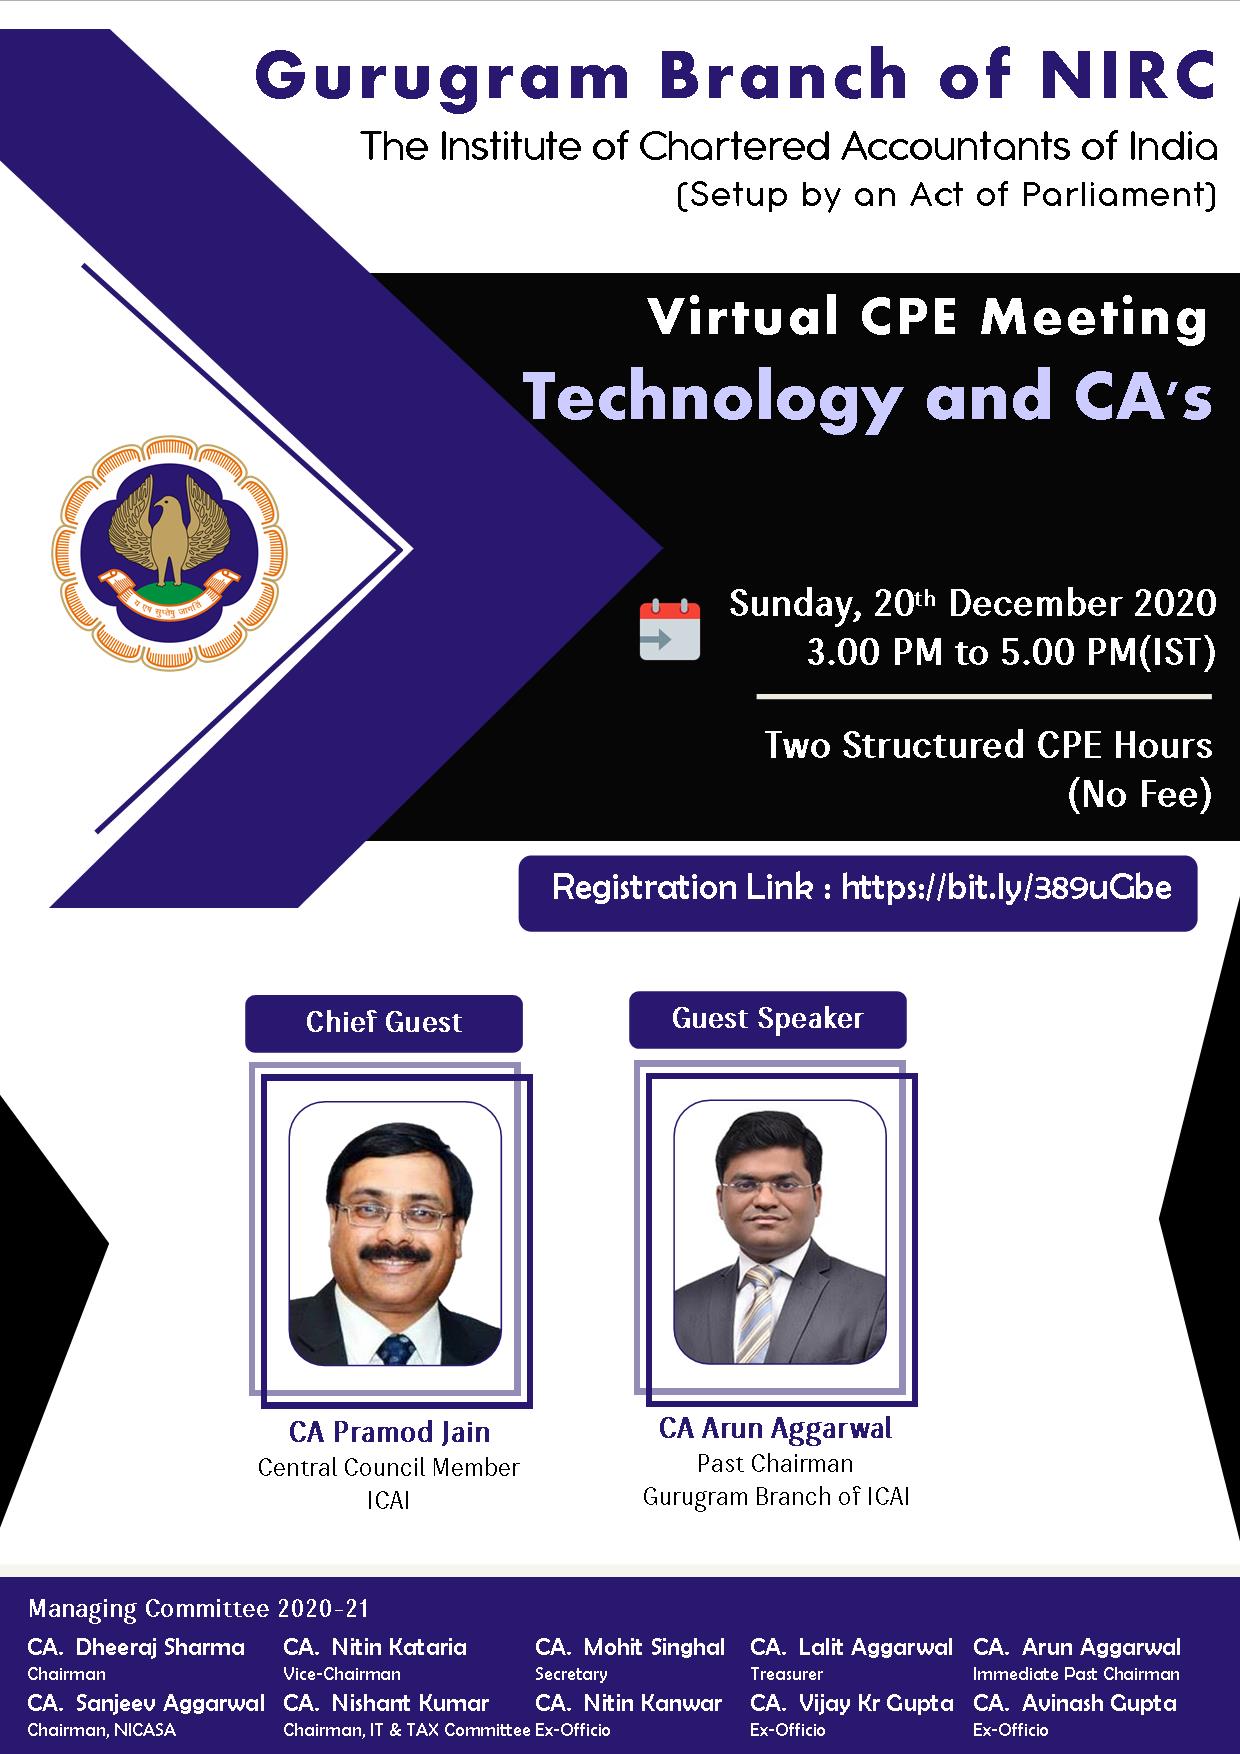 Virtual CPE Meeting on Technology and CA's